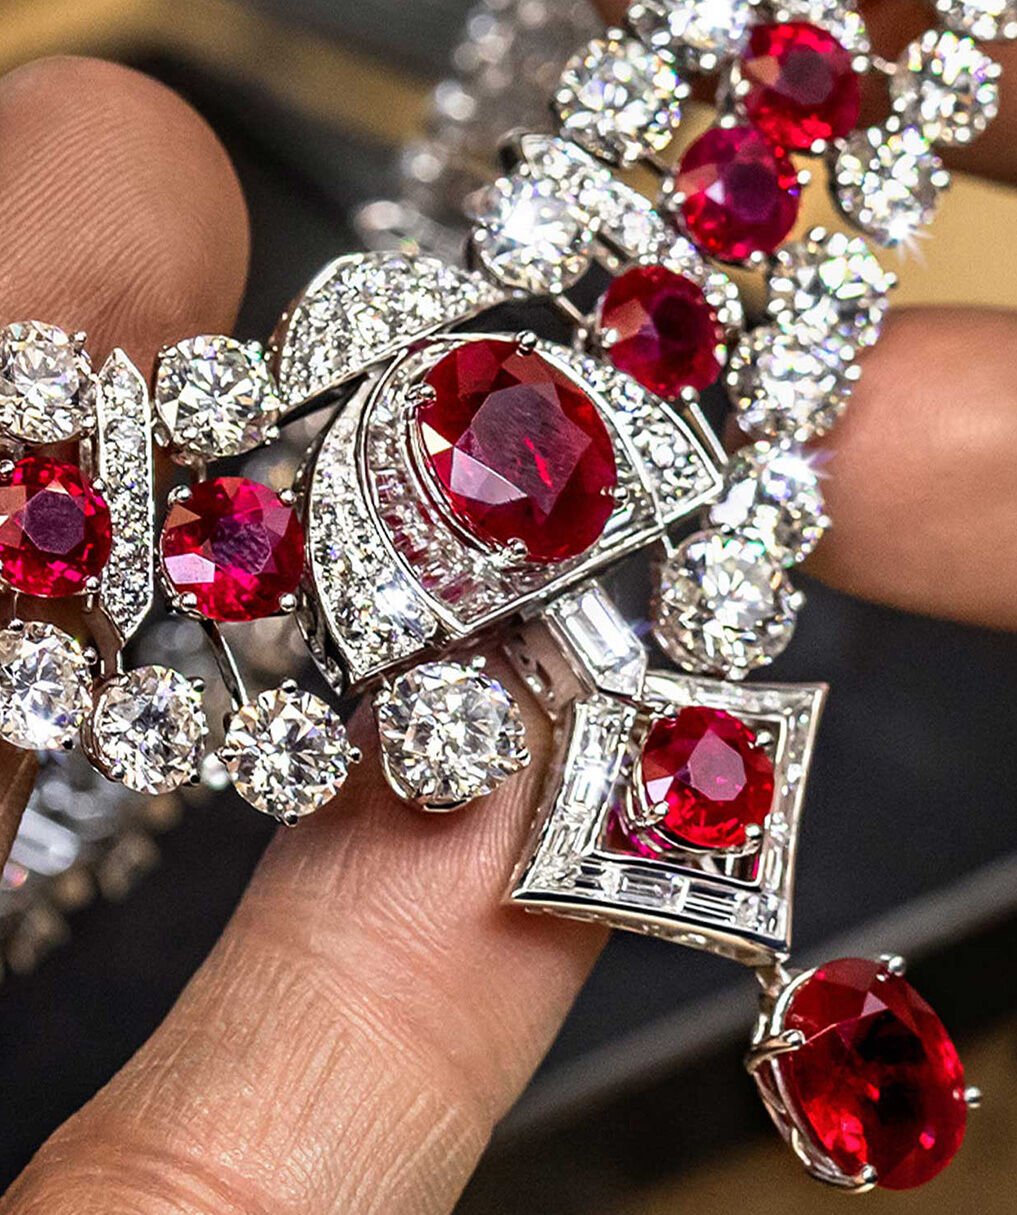 Video of the making of Graff ruby and white diamond high jewellery